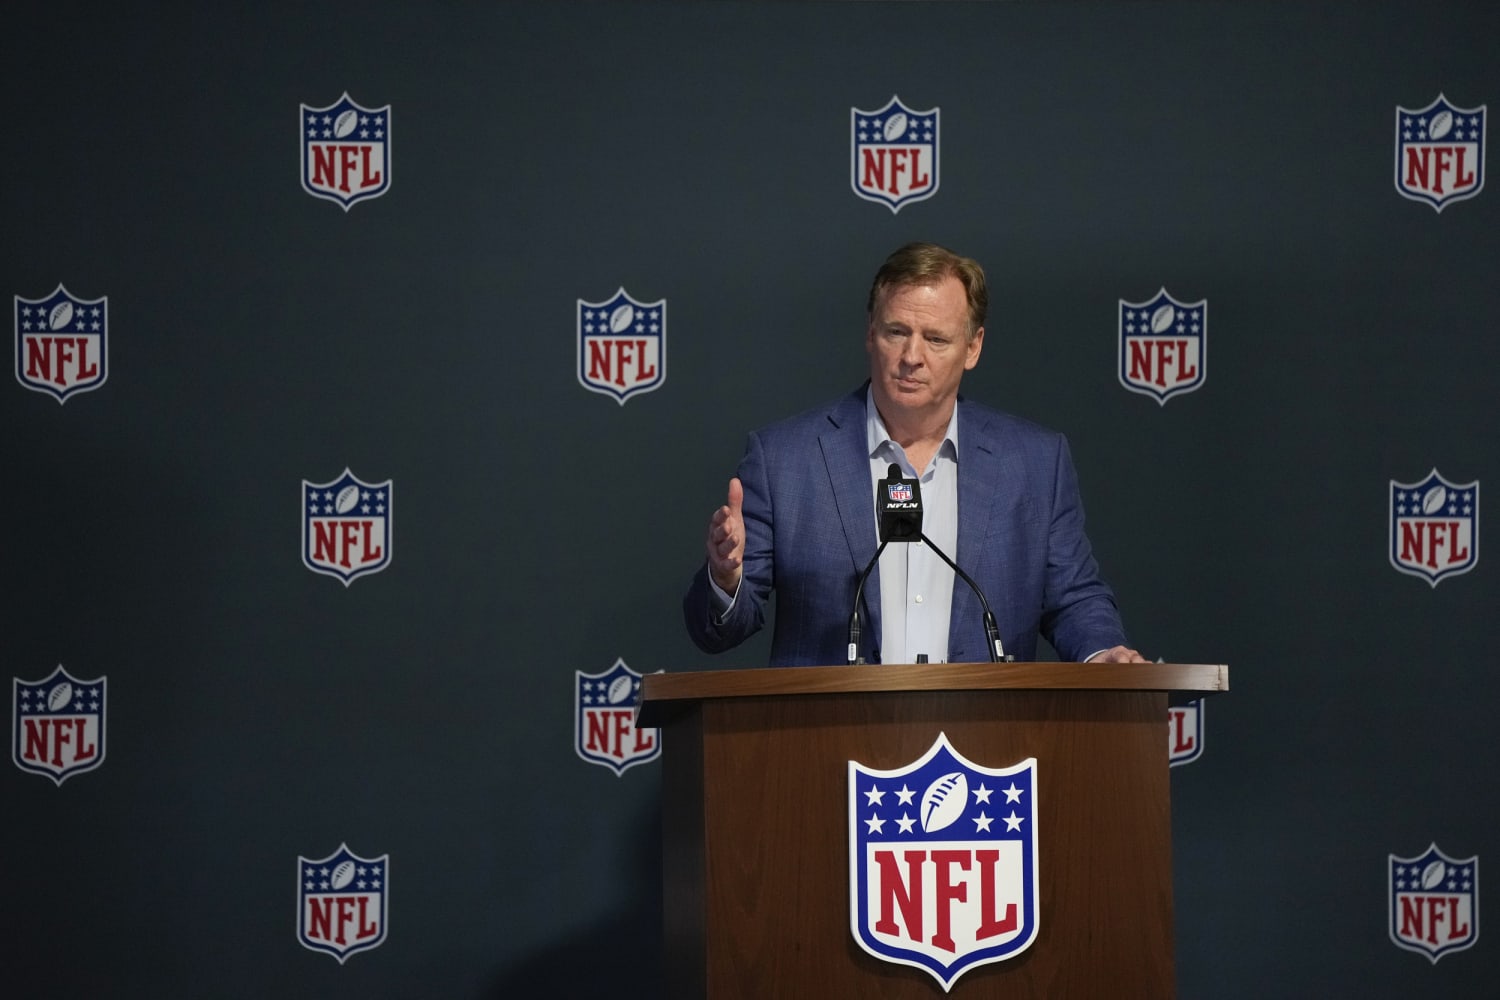 State attorneys general warn NFL about its treatment of female employees